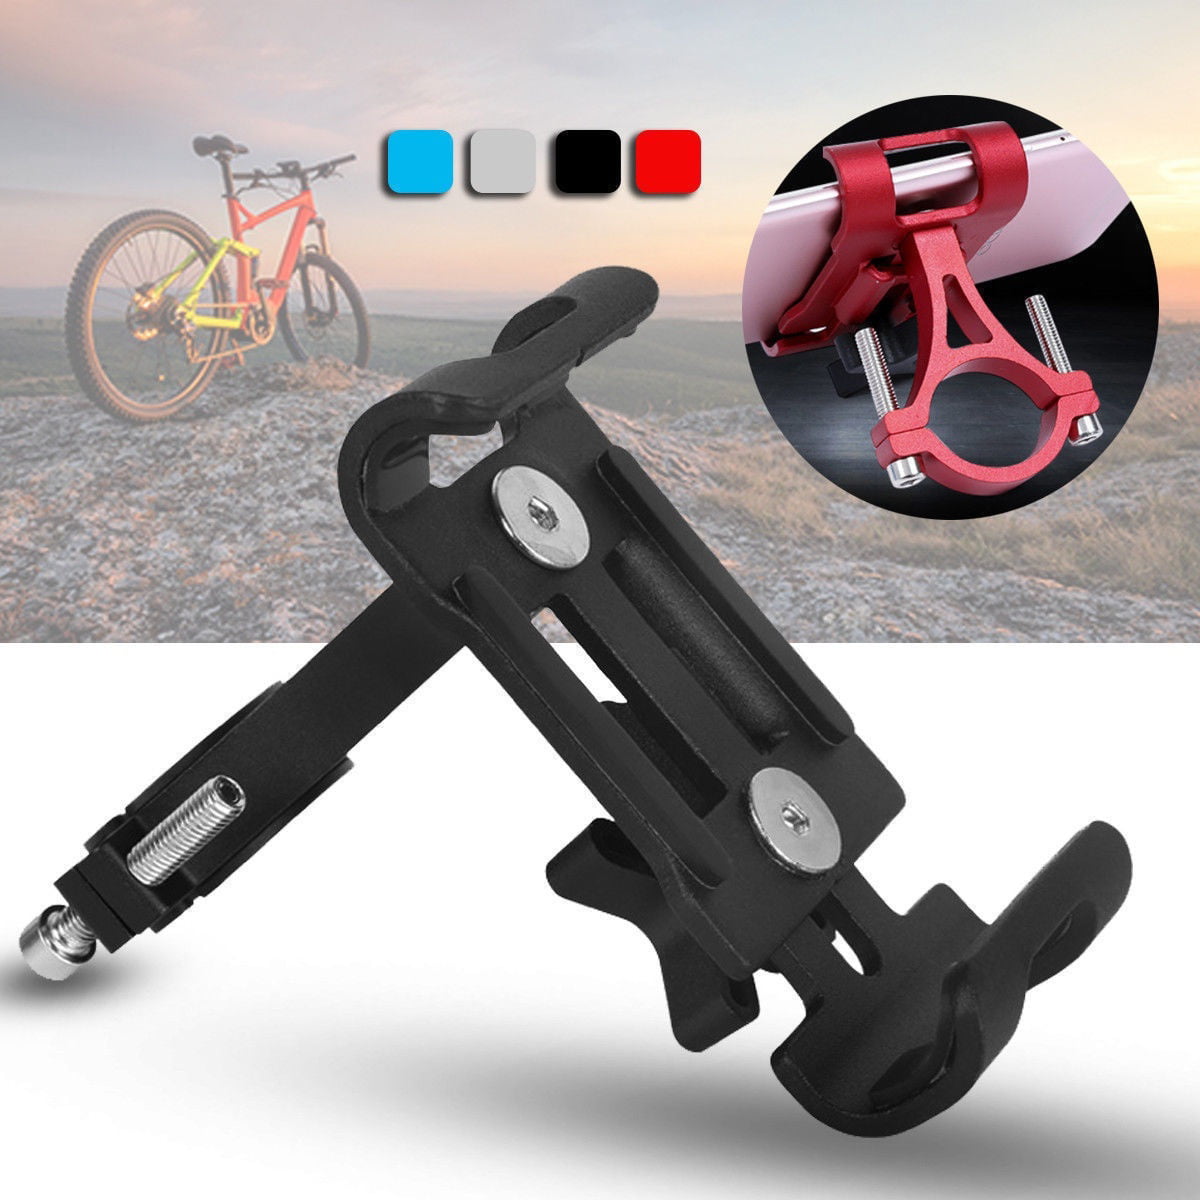 Details about   Aluminum Motorcycle Bike Bicycle Holder Mount Handlebar For Cell Phone GPS 